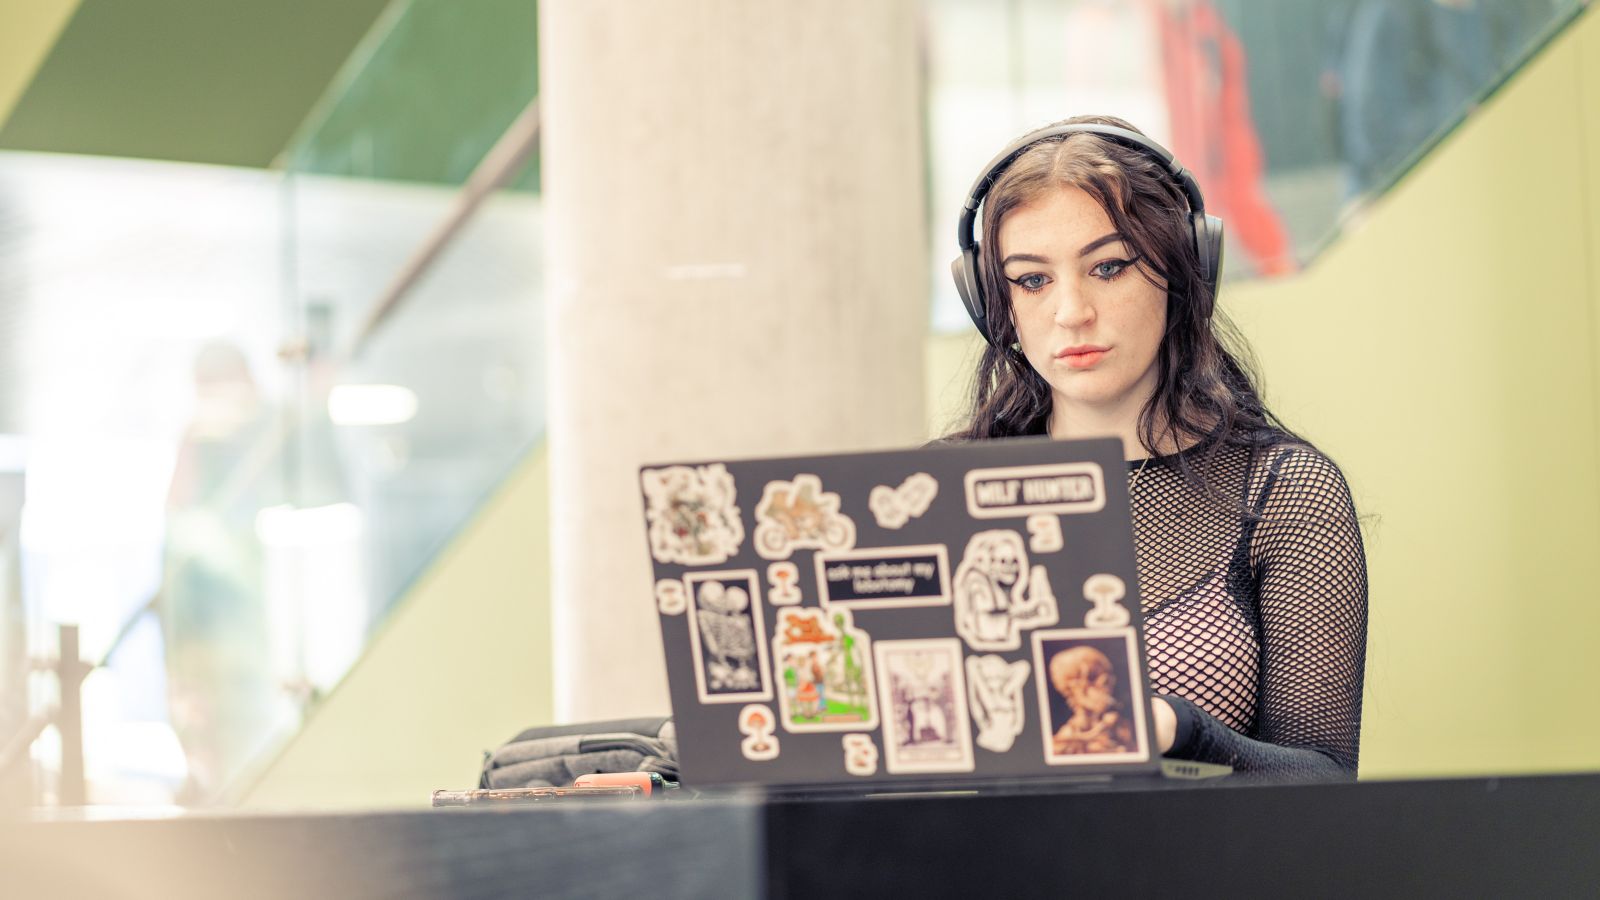 A female student wearing headphones and working on her laptop, which is covered in stickers, from a table in the Hub.